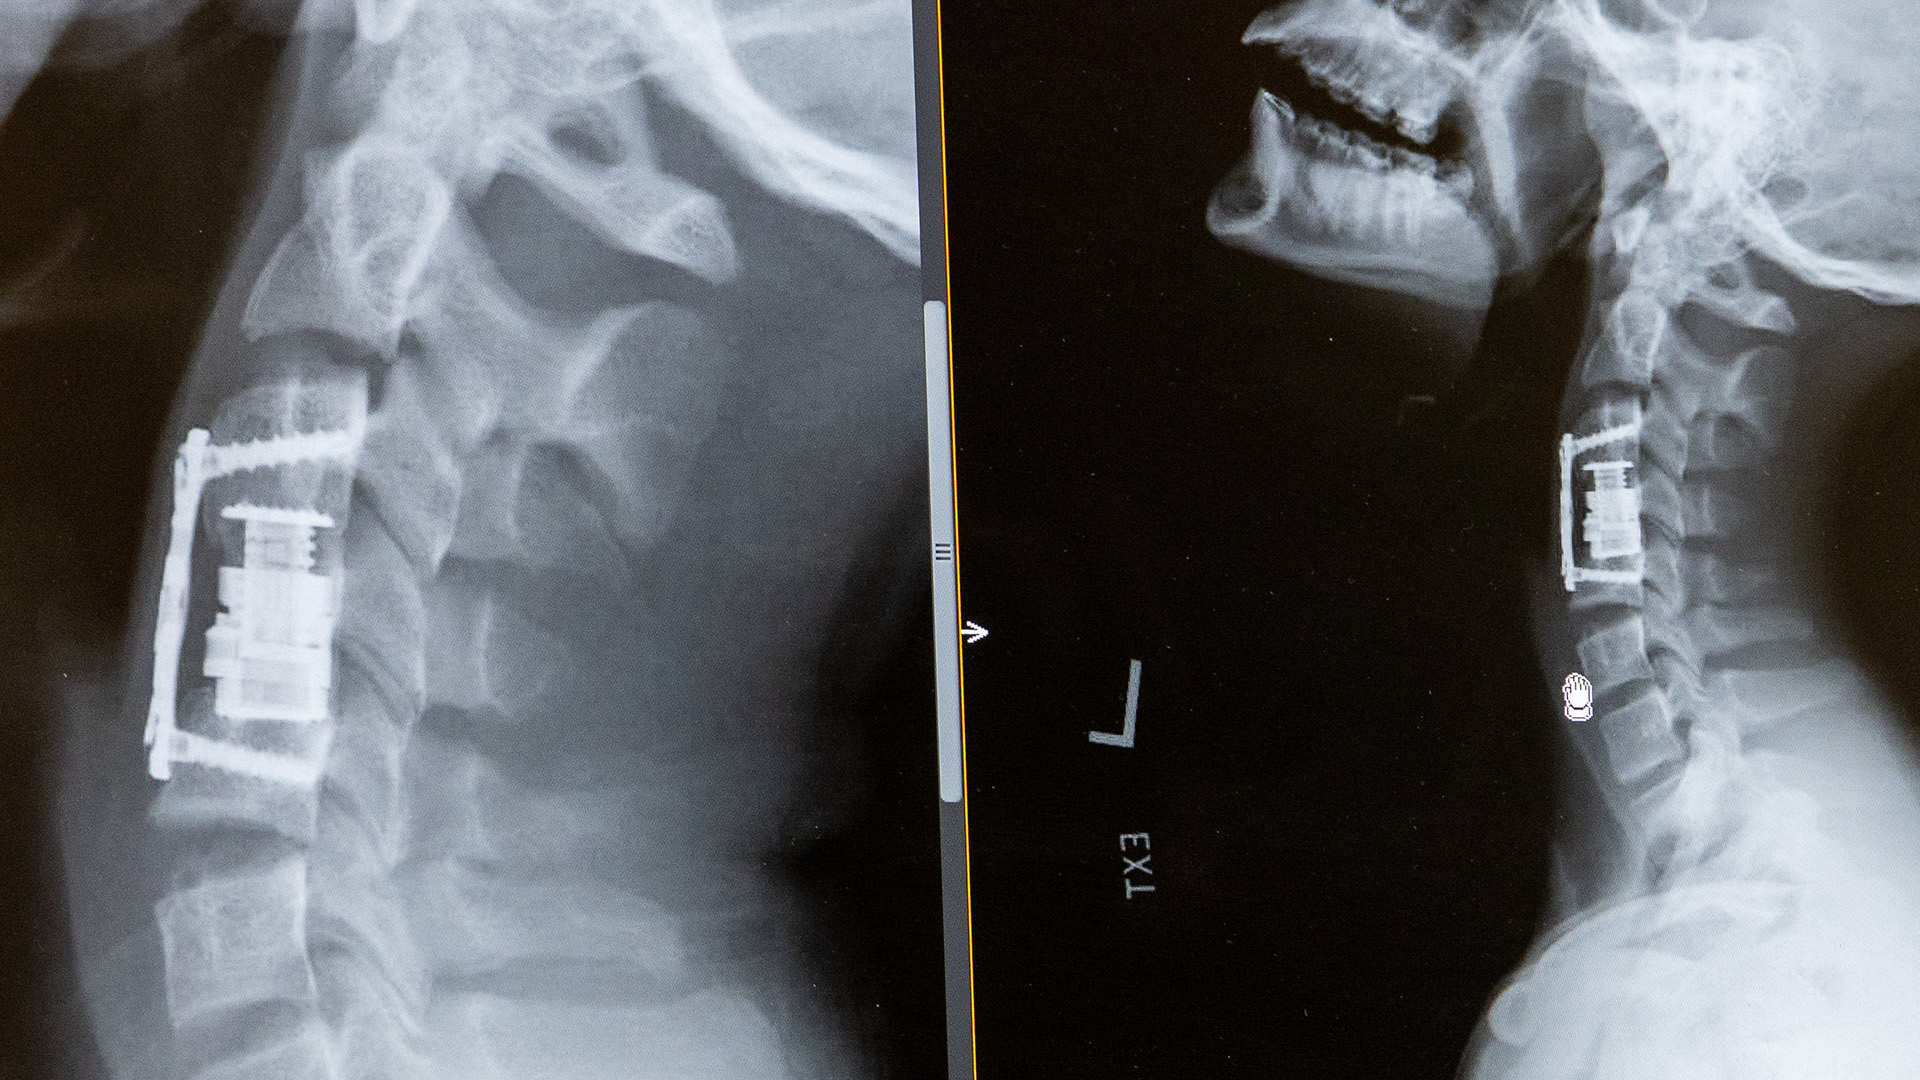 x-ray images that show a titanium metal cylinder in place of a vertebra